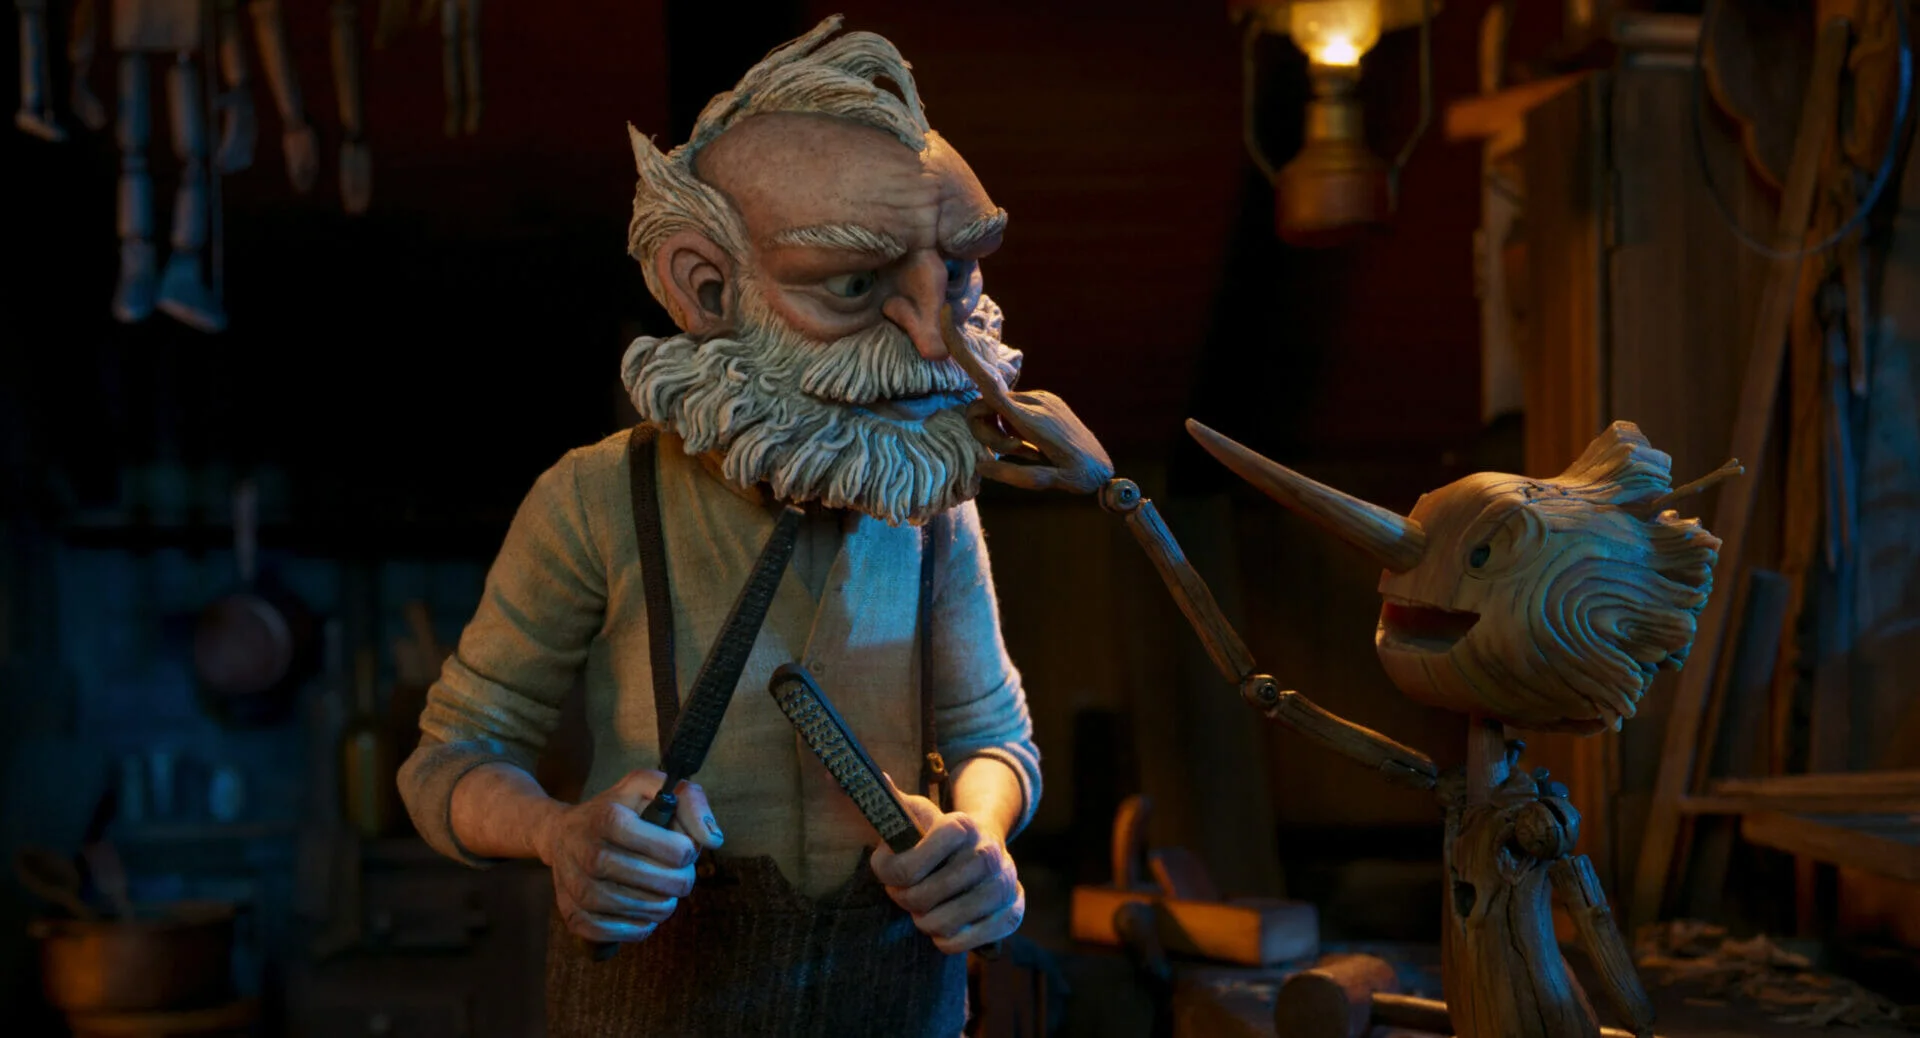 Guillermo del Toro's Pinocchio | A Stop-Motion Story Between Classic and Art Cinema